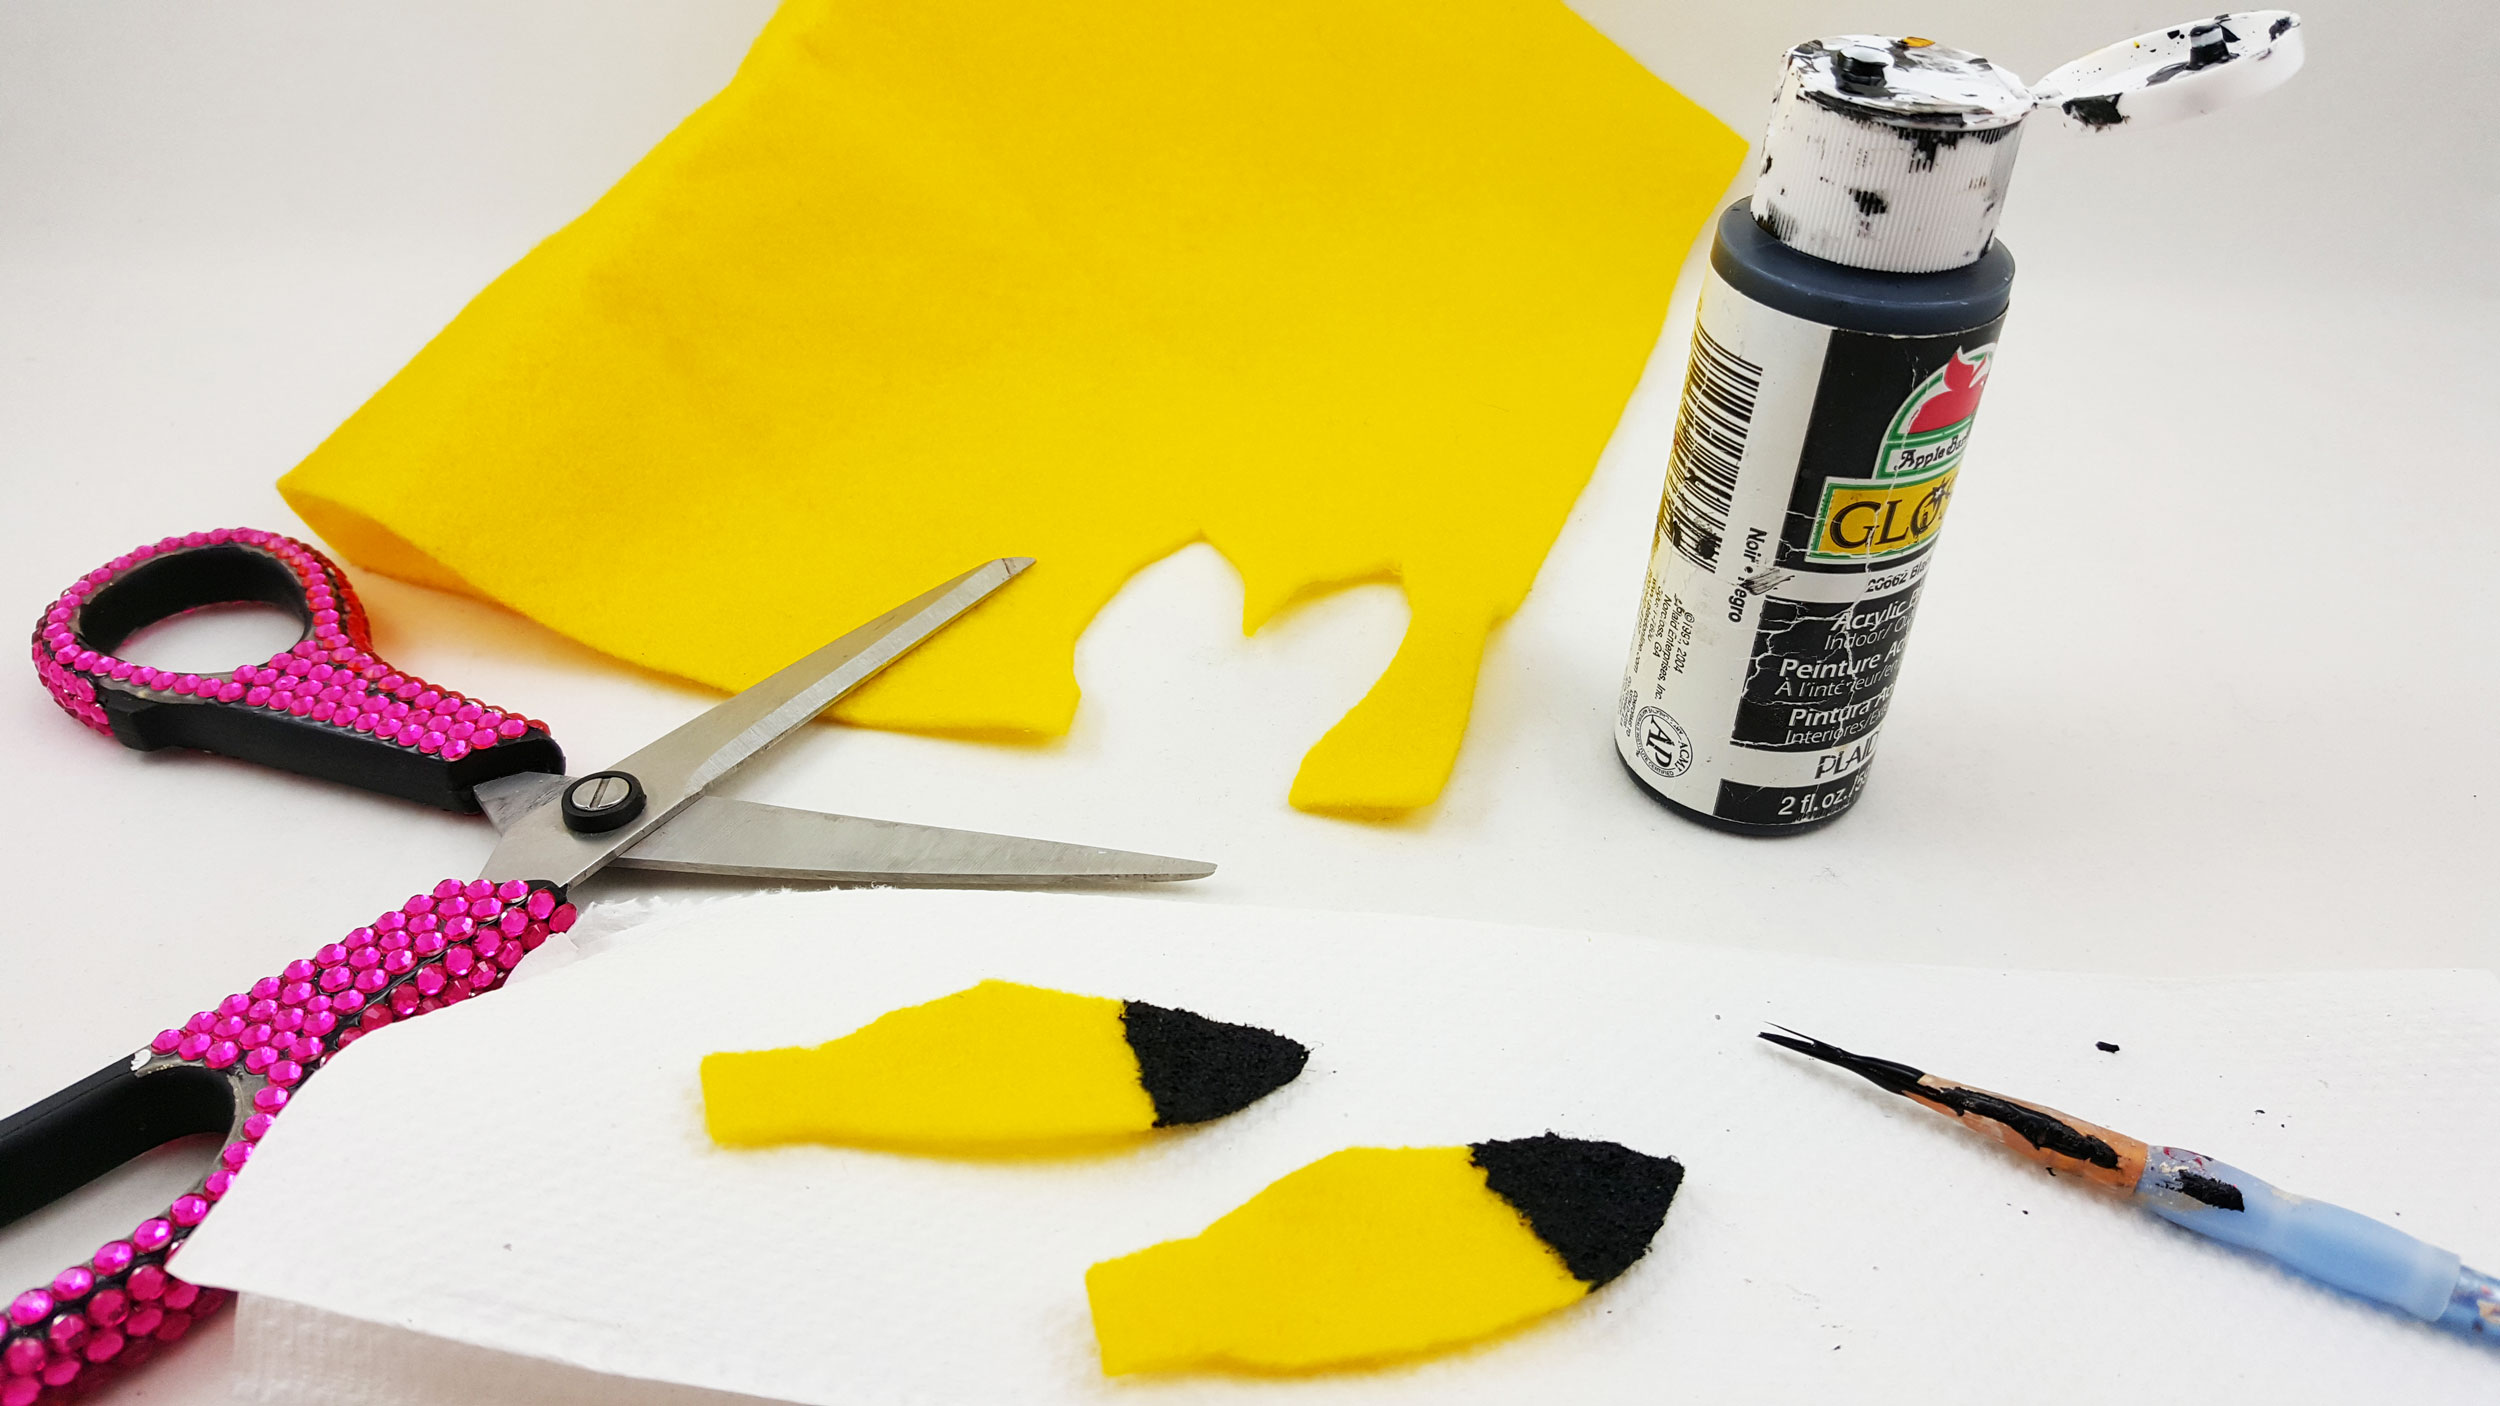 The second step to make a Pikachu ornament is to cut the ears out of the fabric and paint the tips black. | OrnamentShop.com